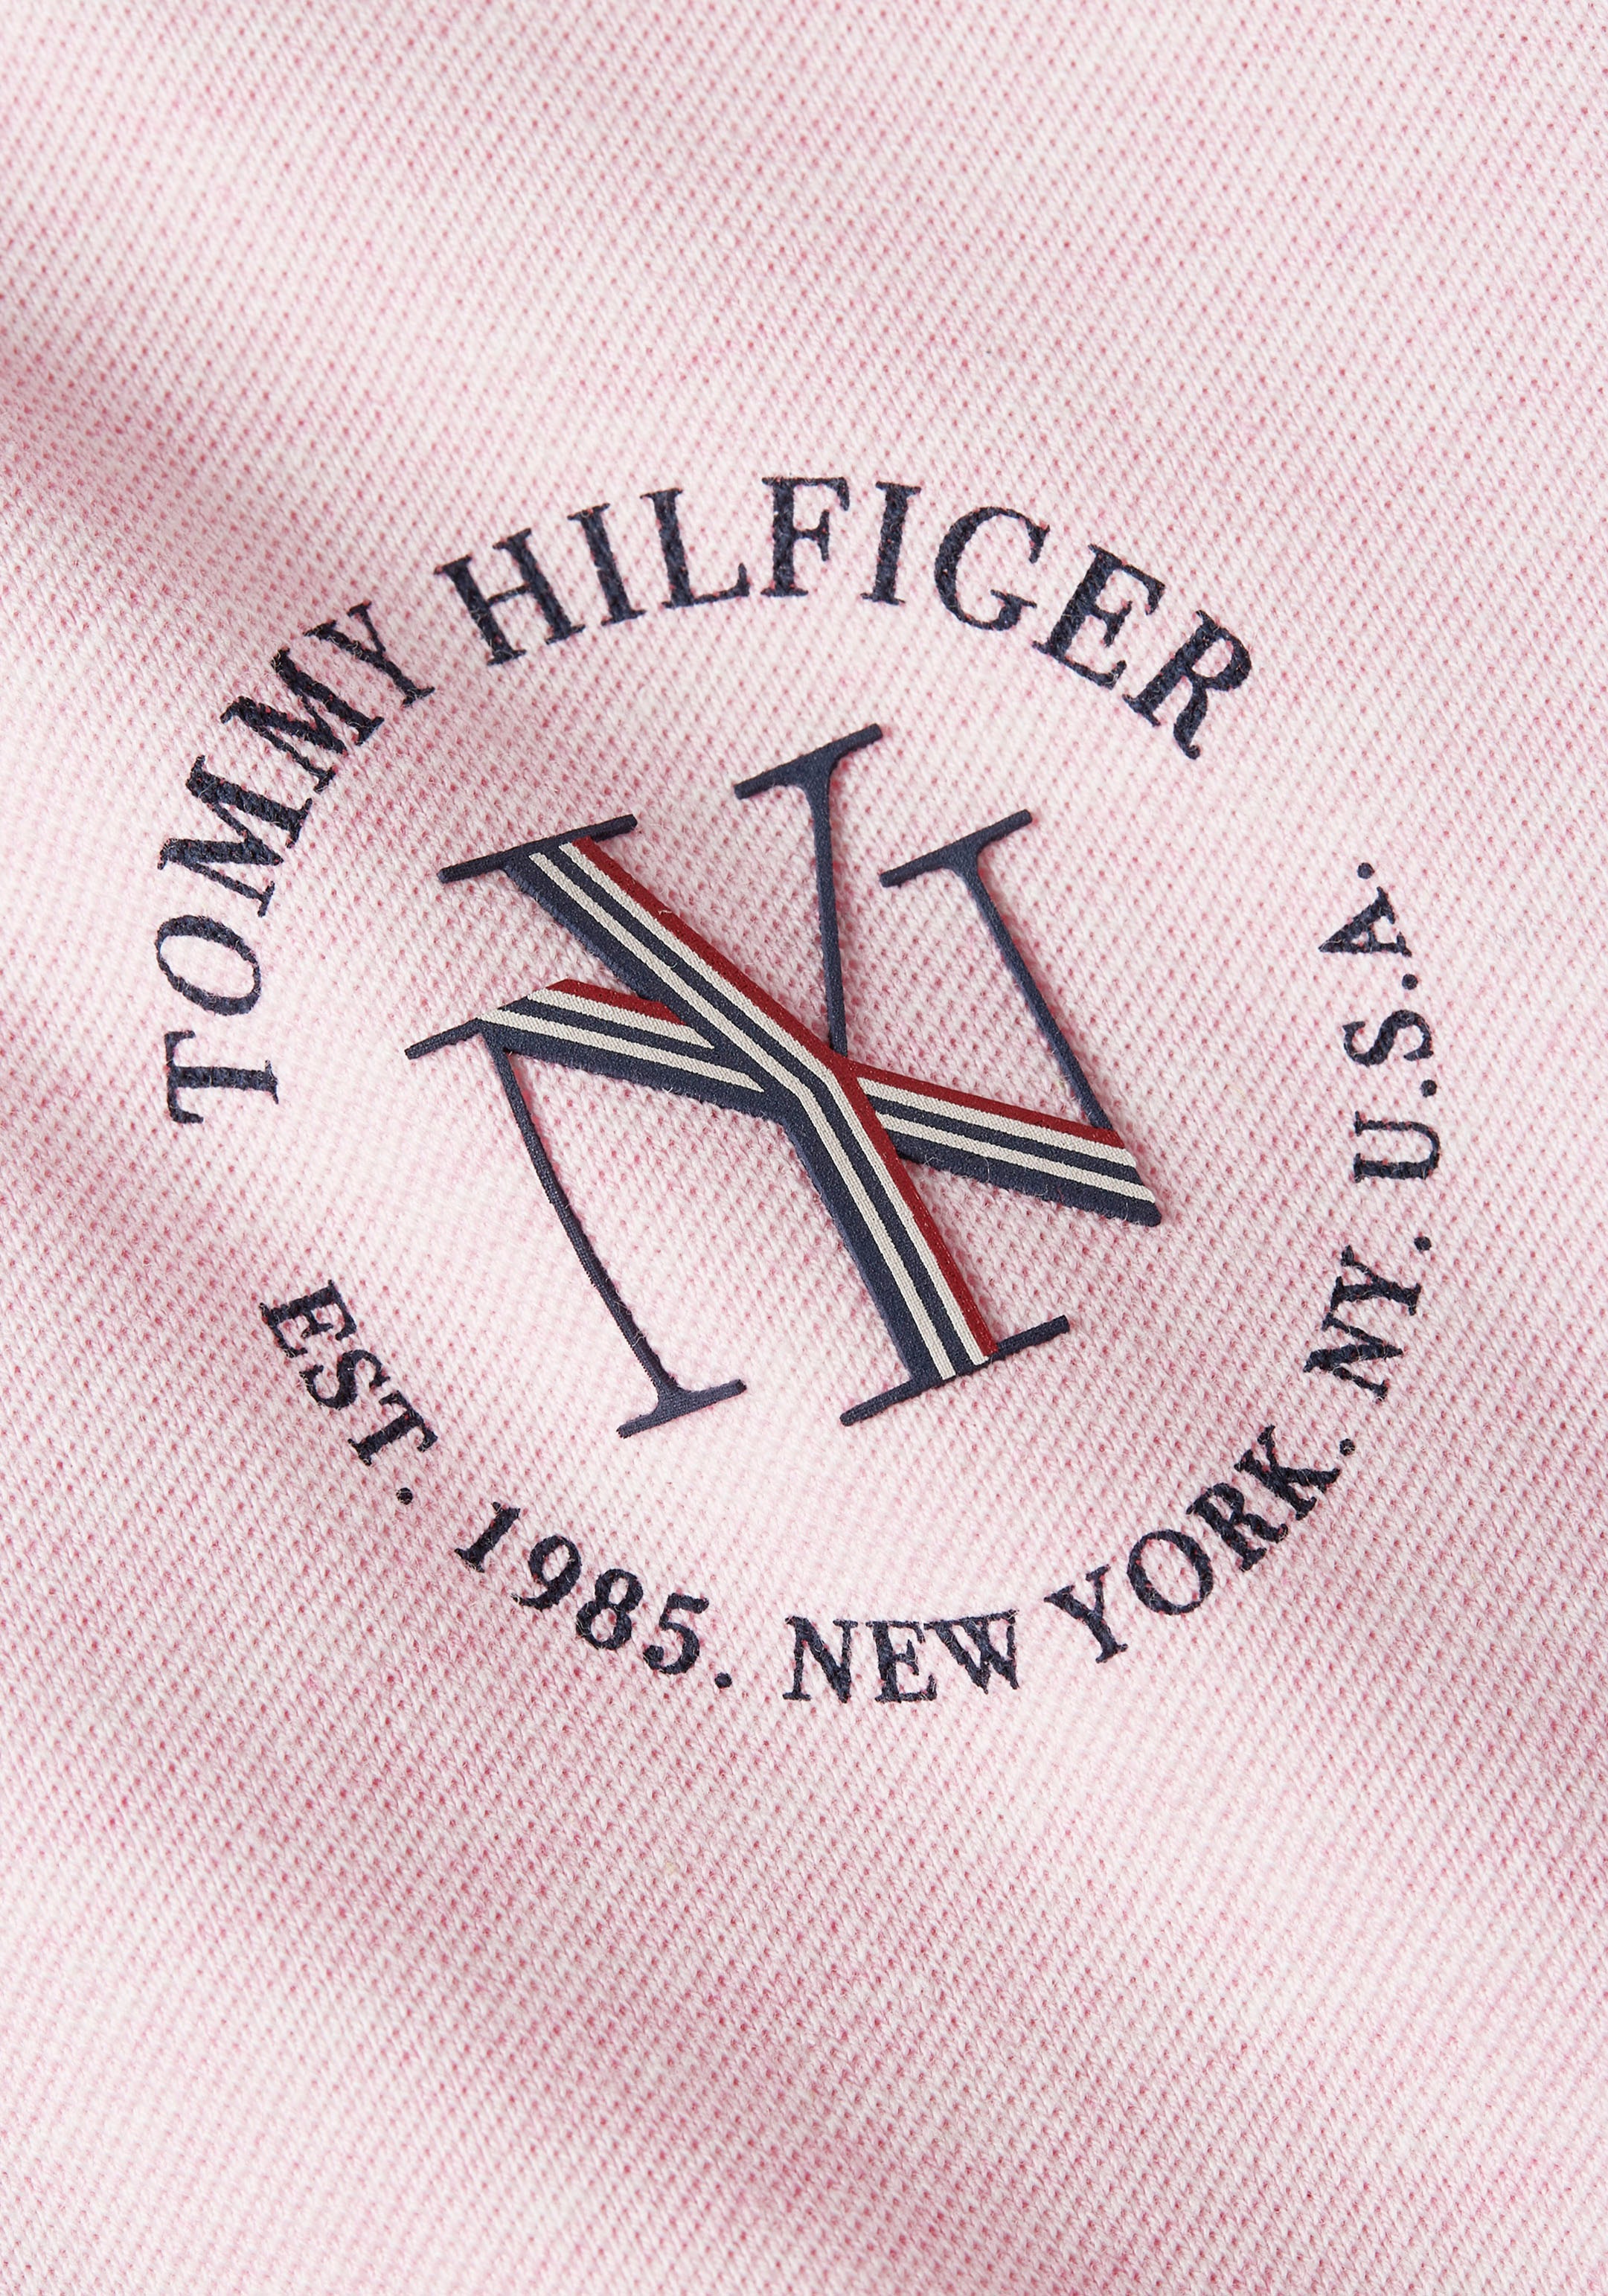 Tommy Hilfiger Poloshirt »REG Markenlabel Tommy bei OTTO POLO Hilfiger mit ROUNDALL NYC SS«